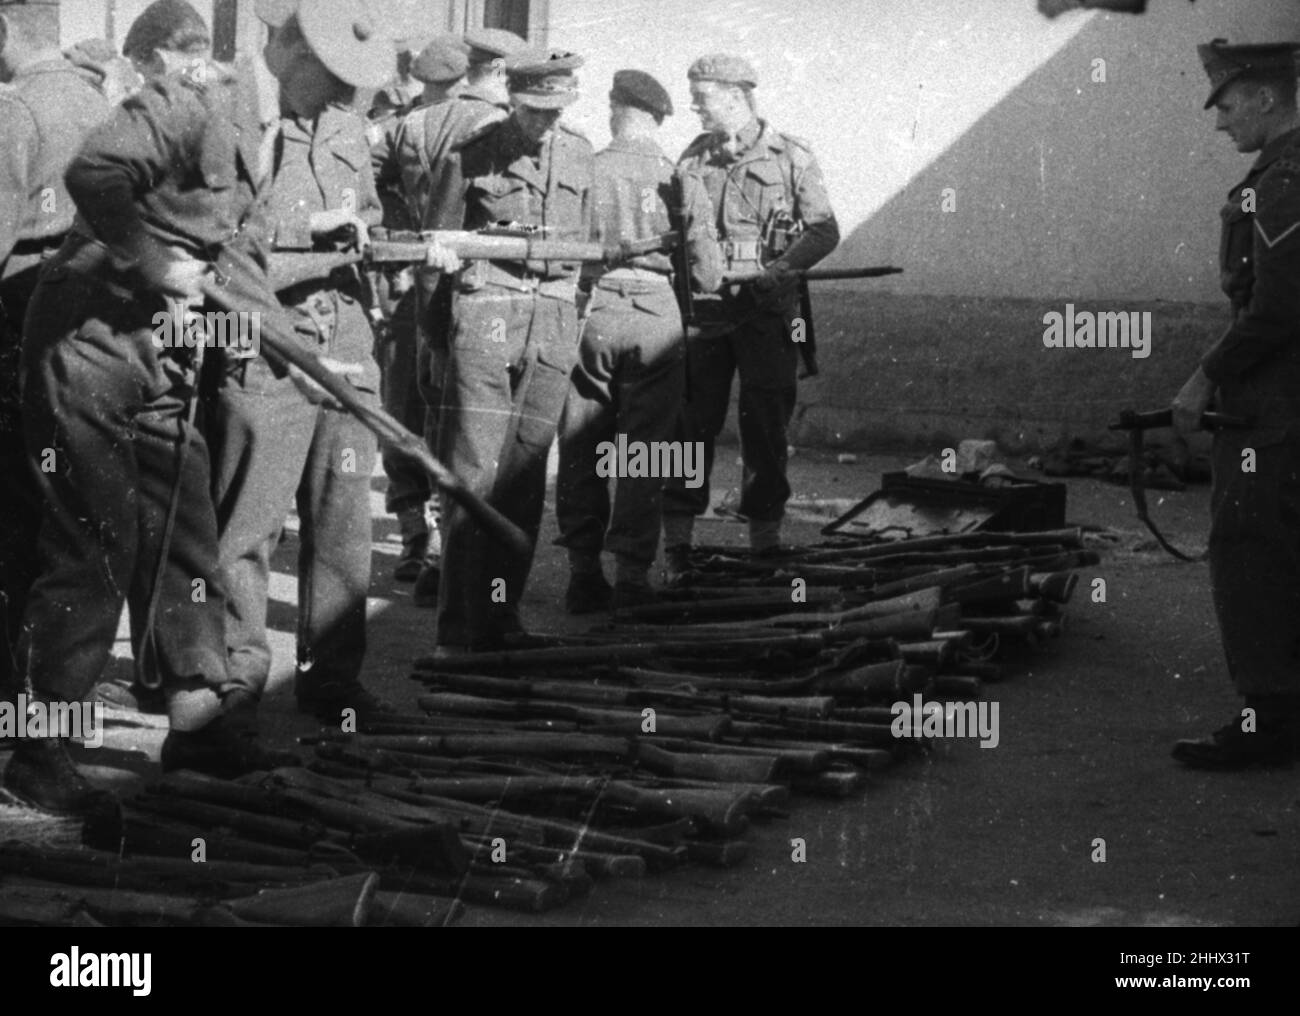 Aftermath of the Ismalia Riots 27th January 1952.   Captured weapons     The Ismalia riots represented a major clash between British Forces and Egyptian auxiliary police in Ismailia, Egypt.    Ismailia is located on Lake Timsah along the coast of the Canal, half-way between Port Said and Suez.     In presend day, The Ismailia Governorate is the capital of the Canal region where the Suez Canal Authority has its headquarters. Stock Photo